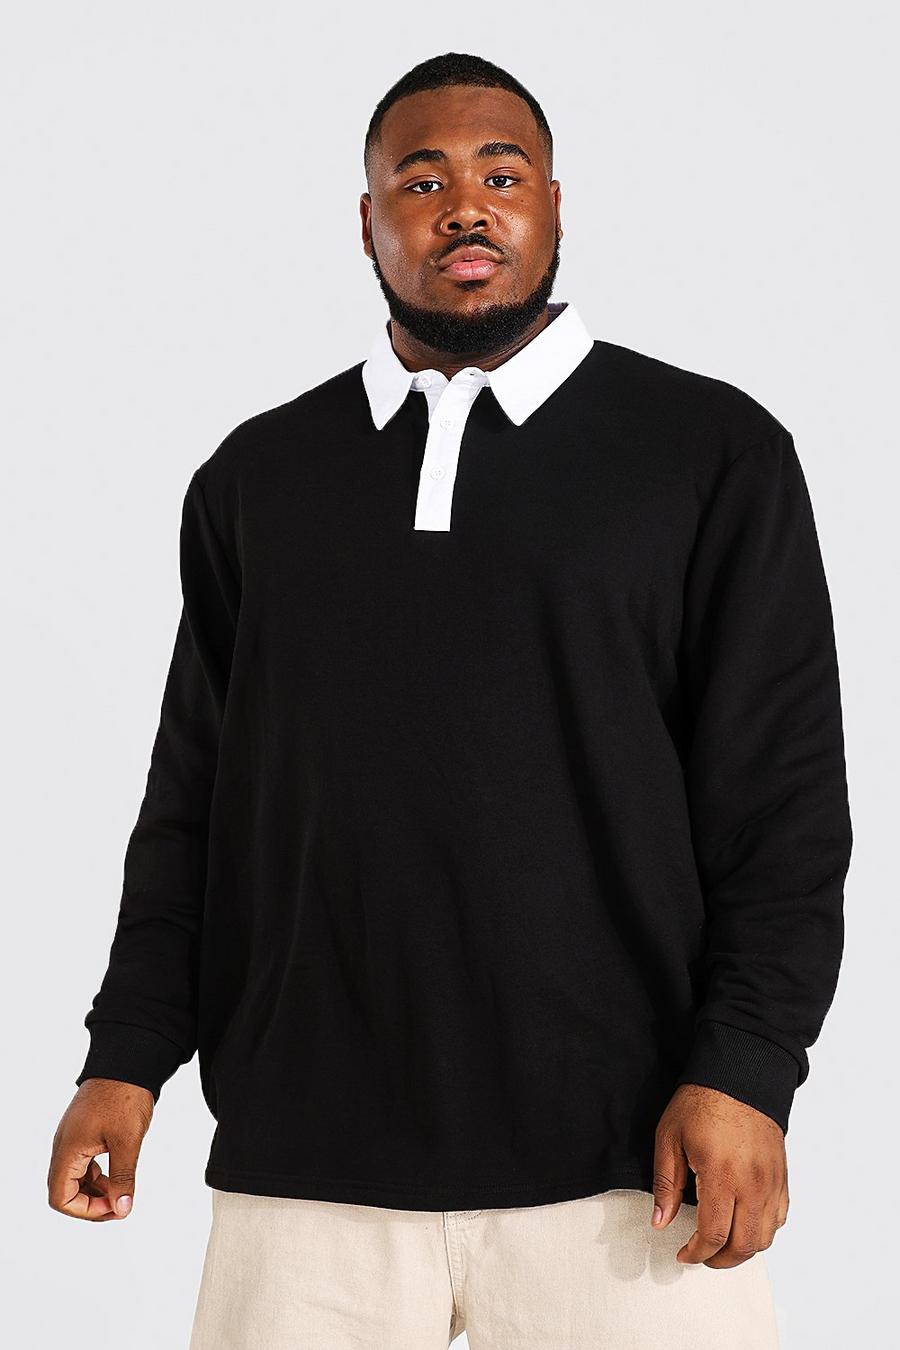 Polo Plus de rugby, Black negro image number 1